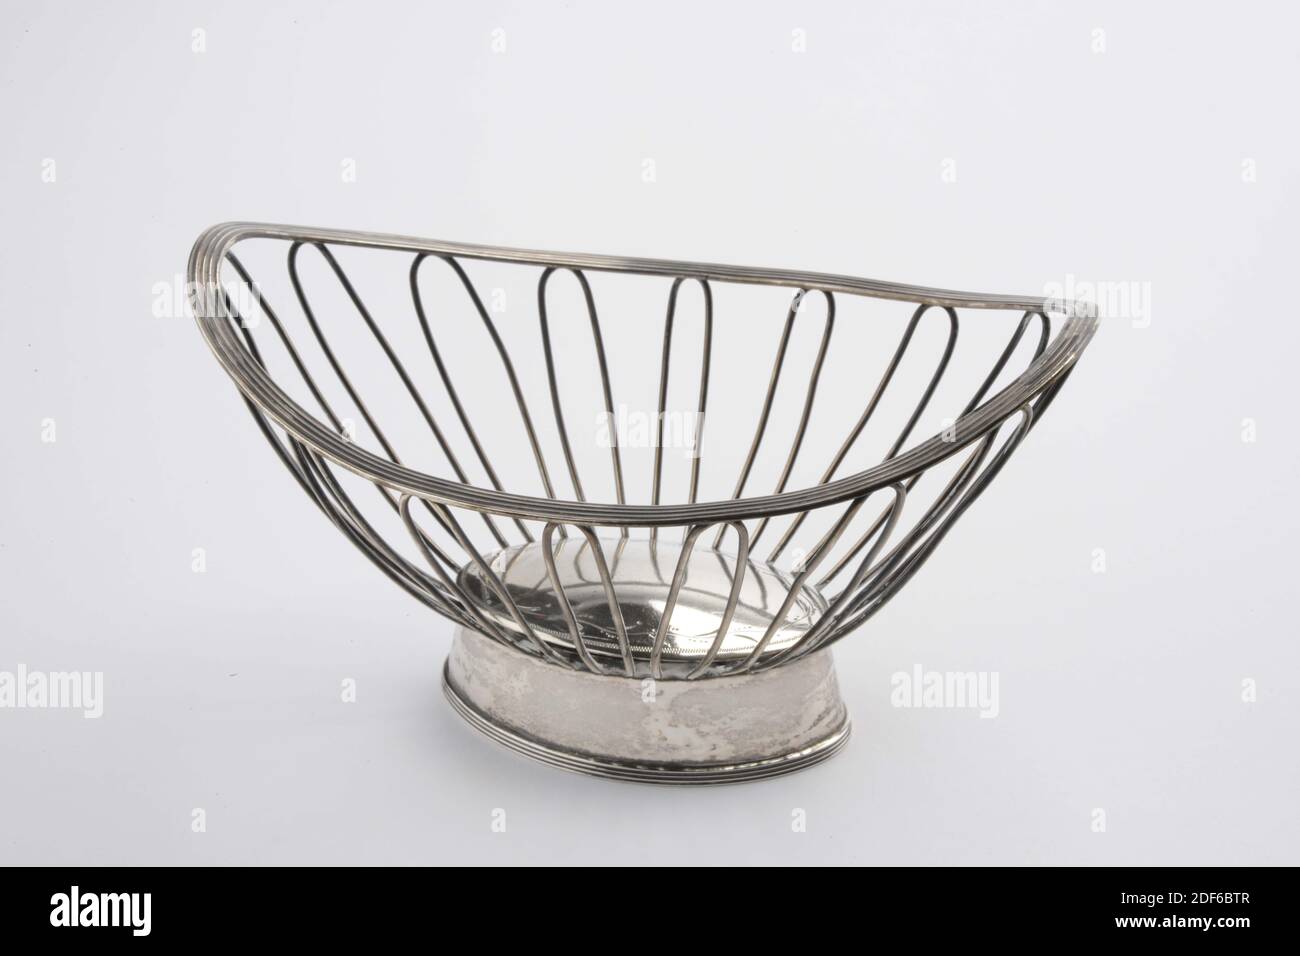 bonbon basket, N. van Voorst, 1815, cut-away, General: 6.4 x 11.6 x 7.4cm (64 x 116 x 74mm), Bar-shaped silver bonbon basket on an oval base. The basket is openwork with loop-shaped bars, which are soldered on the top edge. A fillet edge is applied to the top edge. The inside of the foot has an engraved decoration in the form of twigs. The foot is soldered and finished with a fillet edge. Marked on the bottom, 1975 Stock Photo